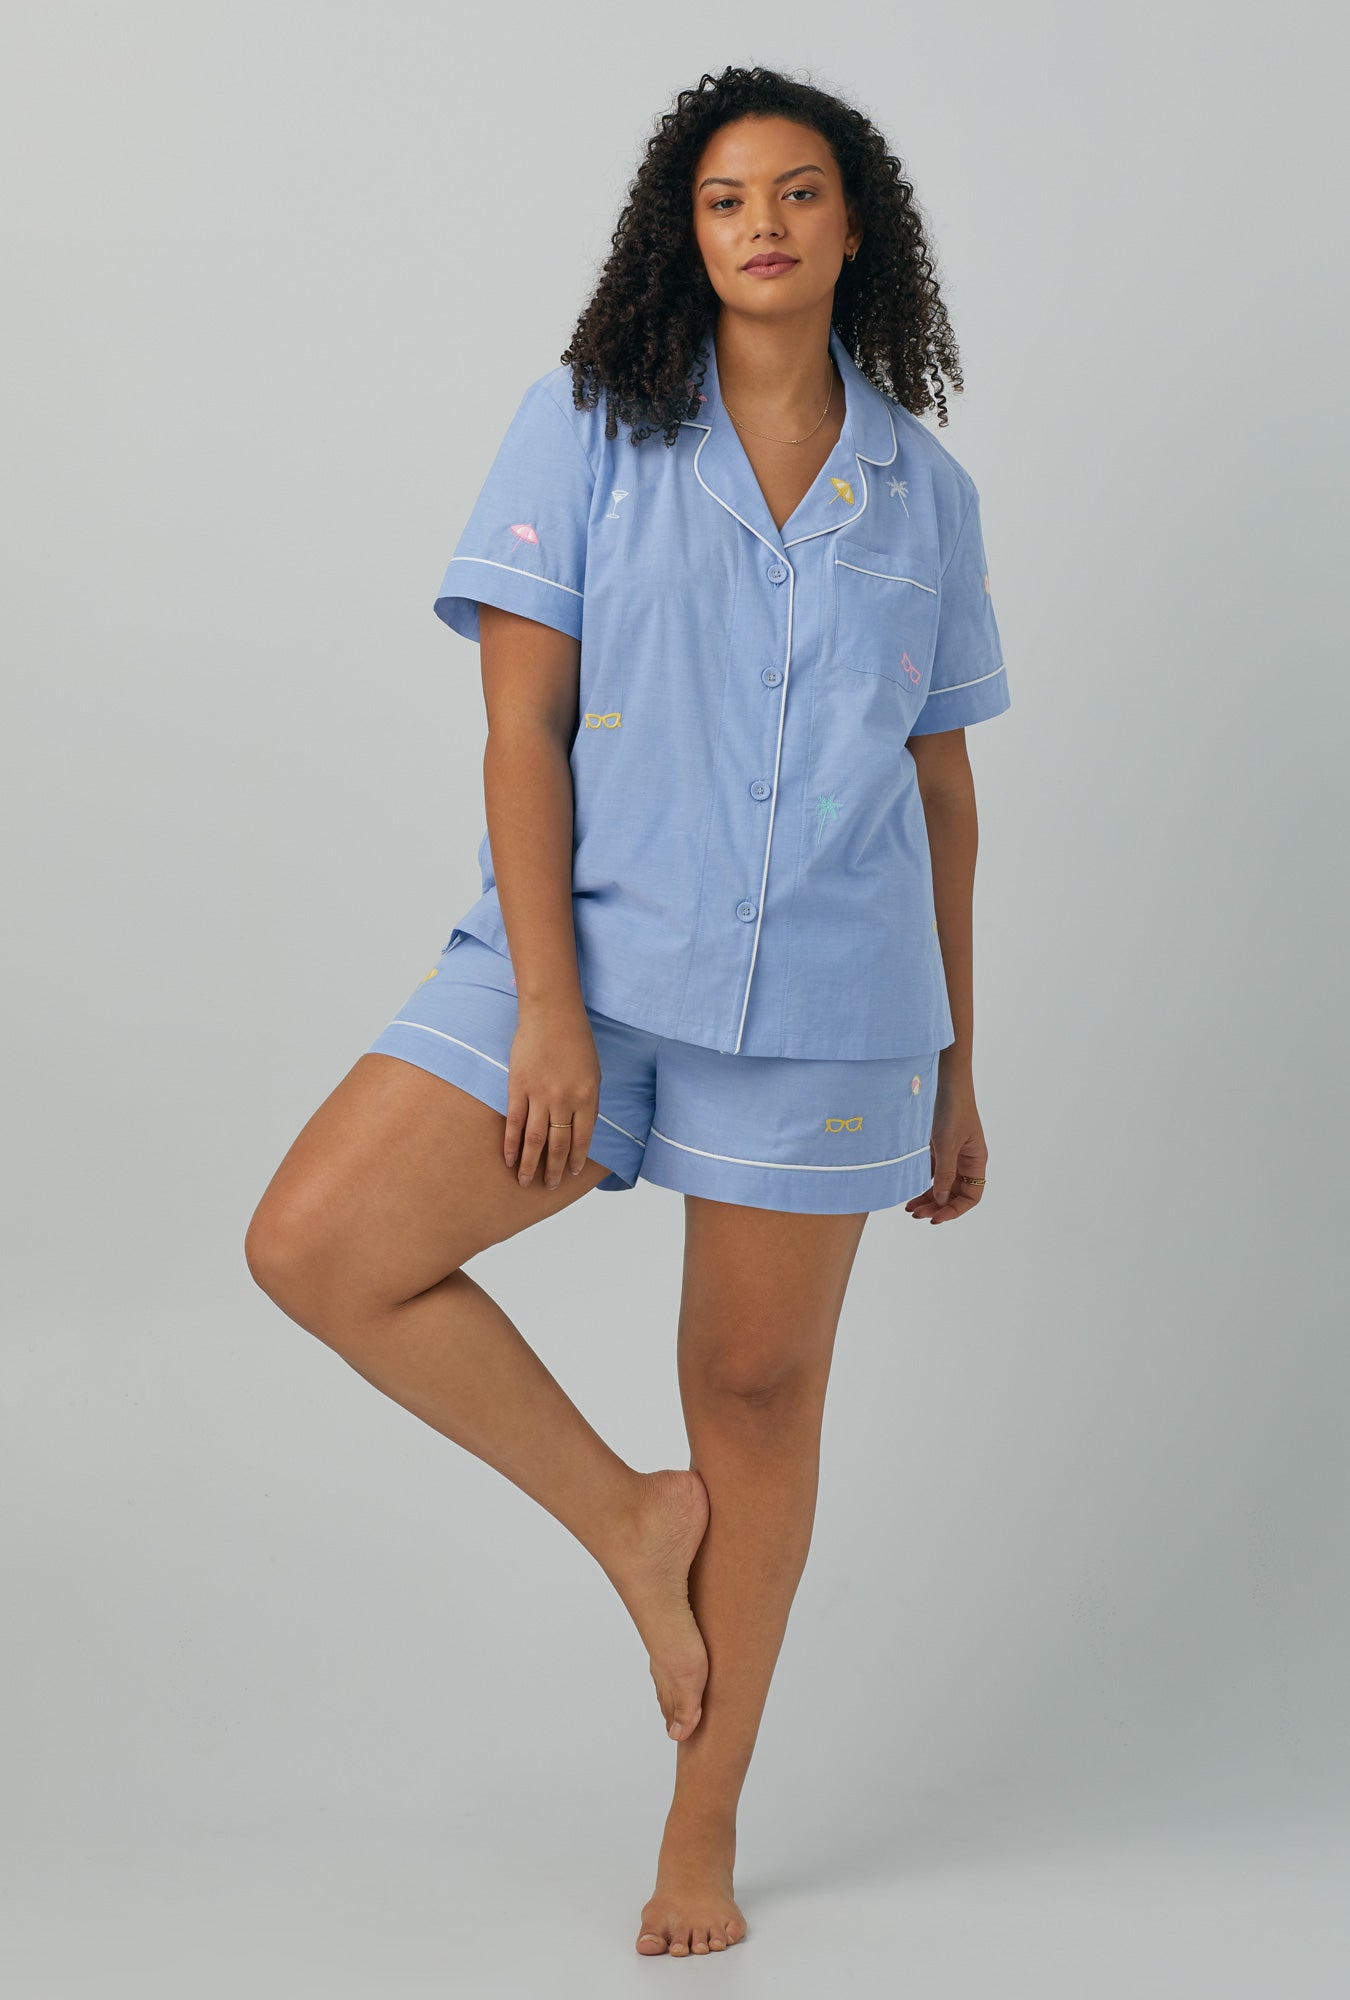 A lady wearing blue Short Sleeve Classic Woven Cotton Poplin Shorty PJ Set with Chambray print